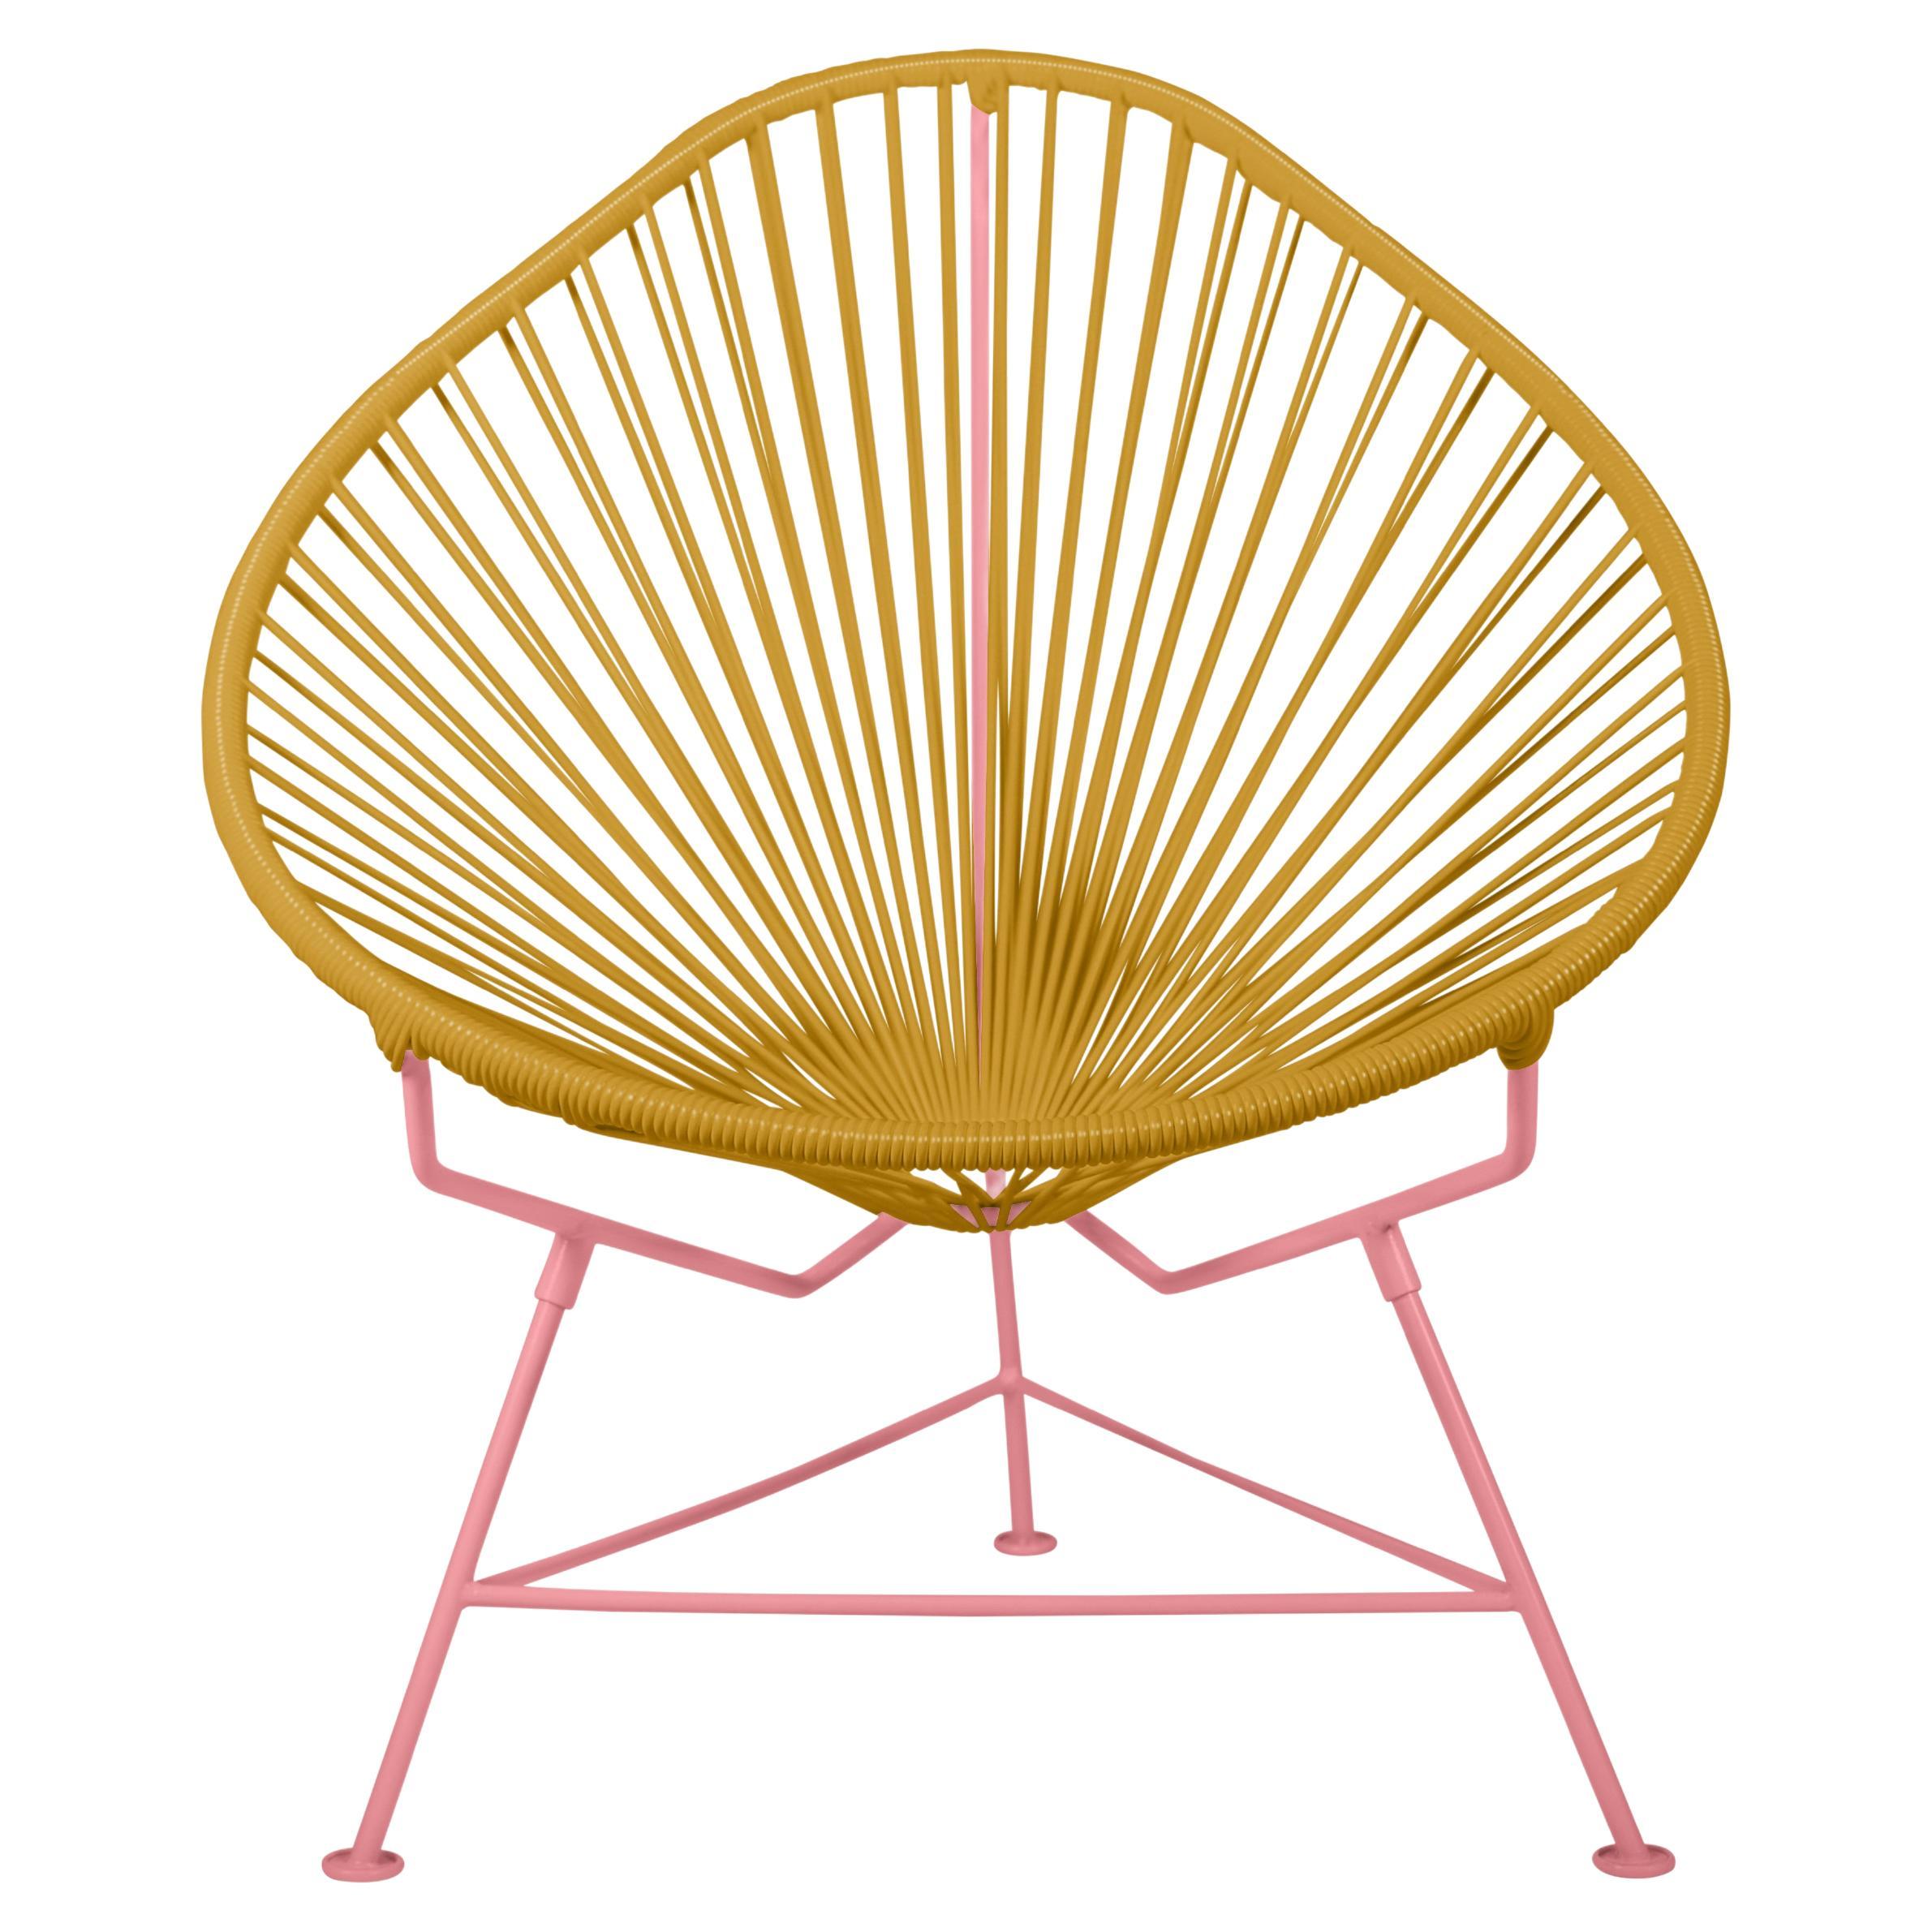 Innit Designs Acapulco Chair Caramel Weave on Coral Frame For Sale